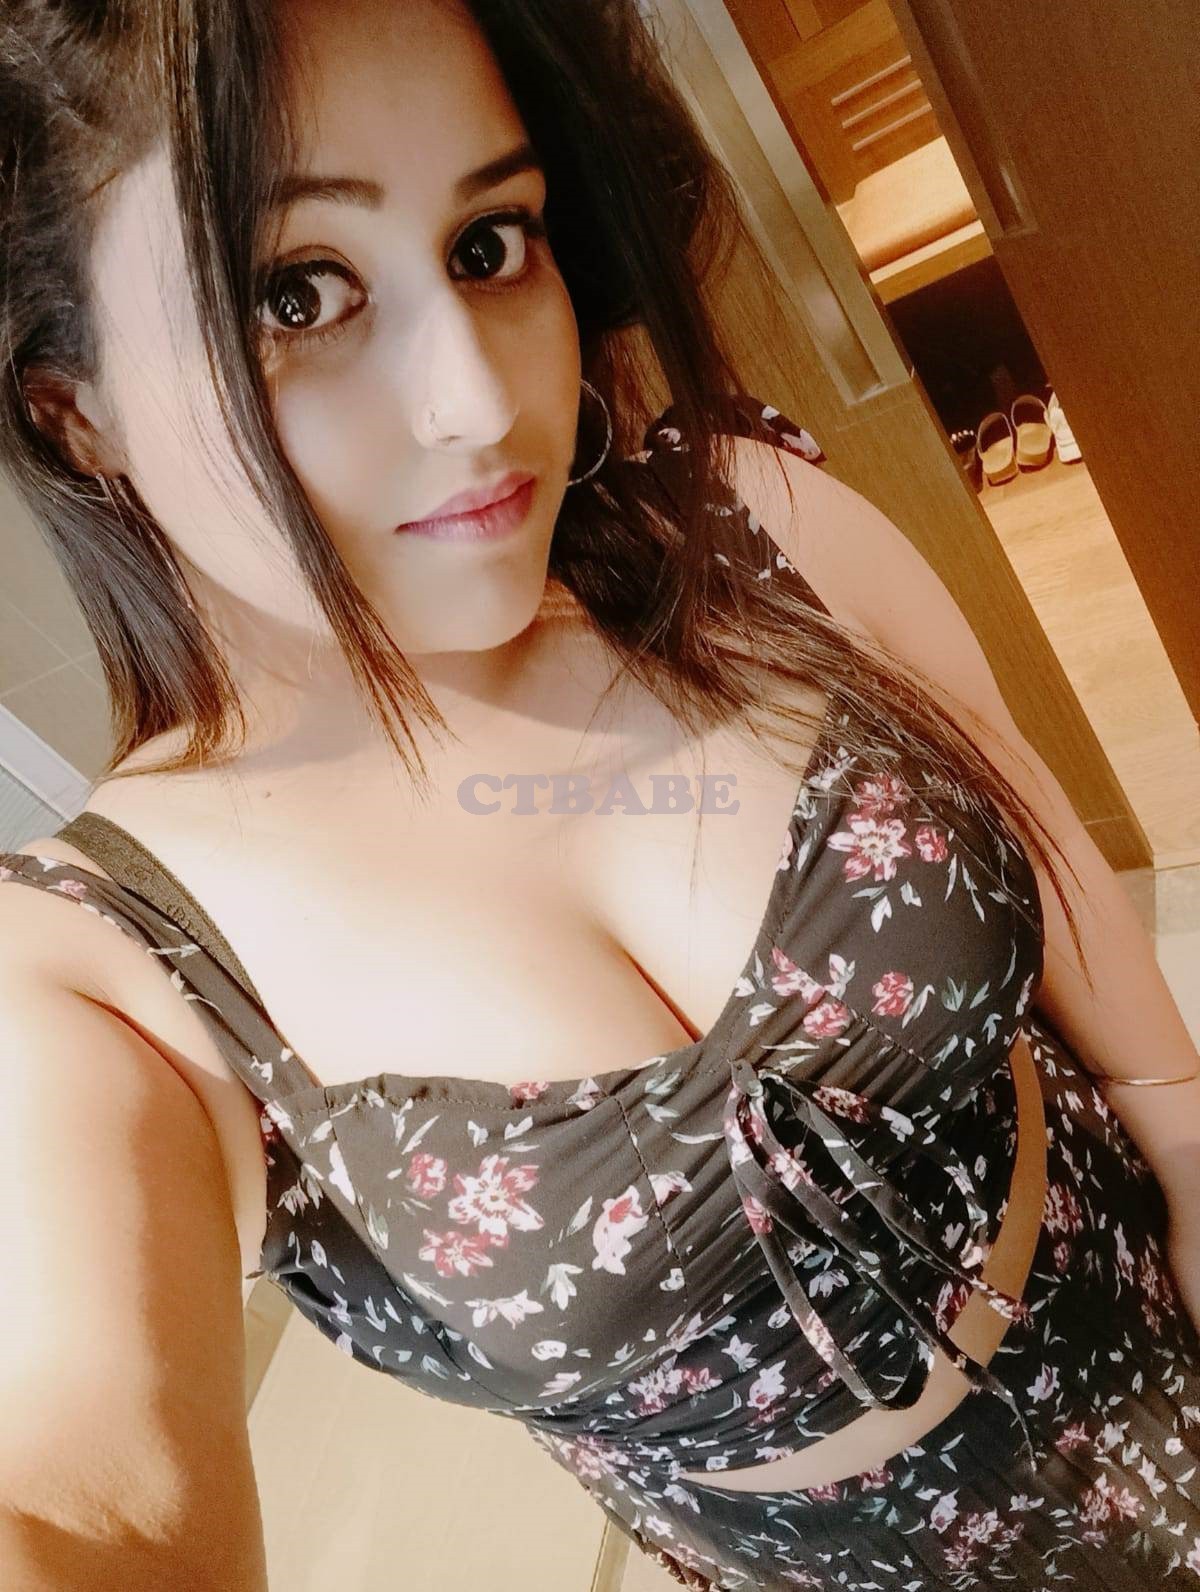 Unique Call Girls in Paharganj 9899856670 Justdial Call Girls Service